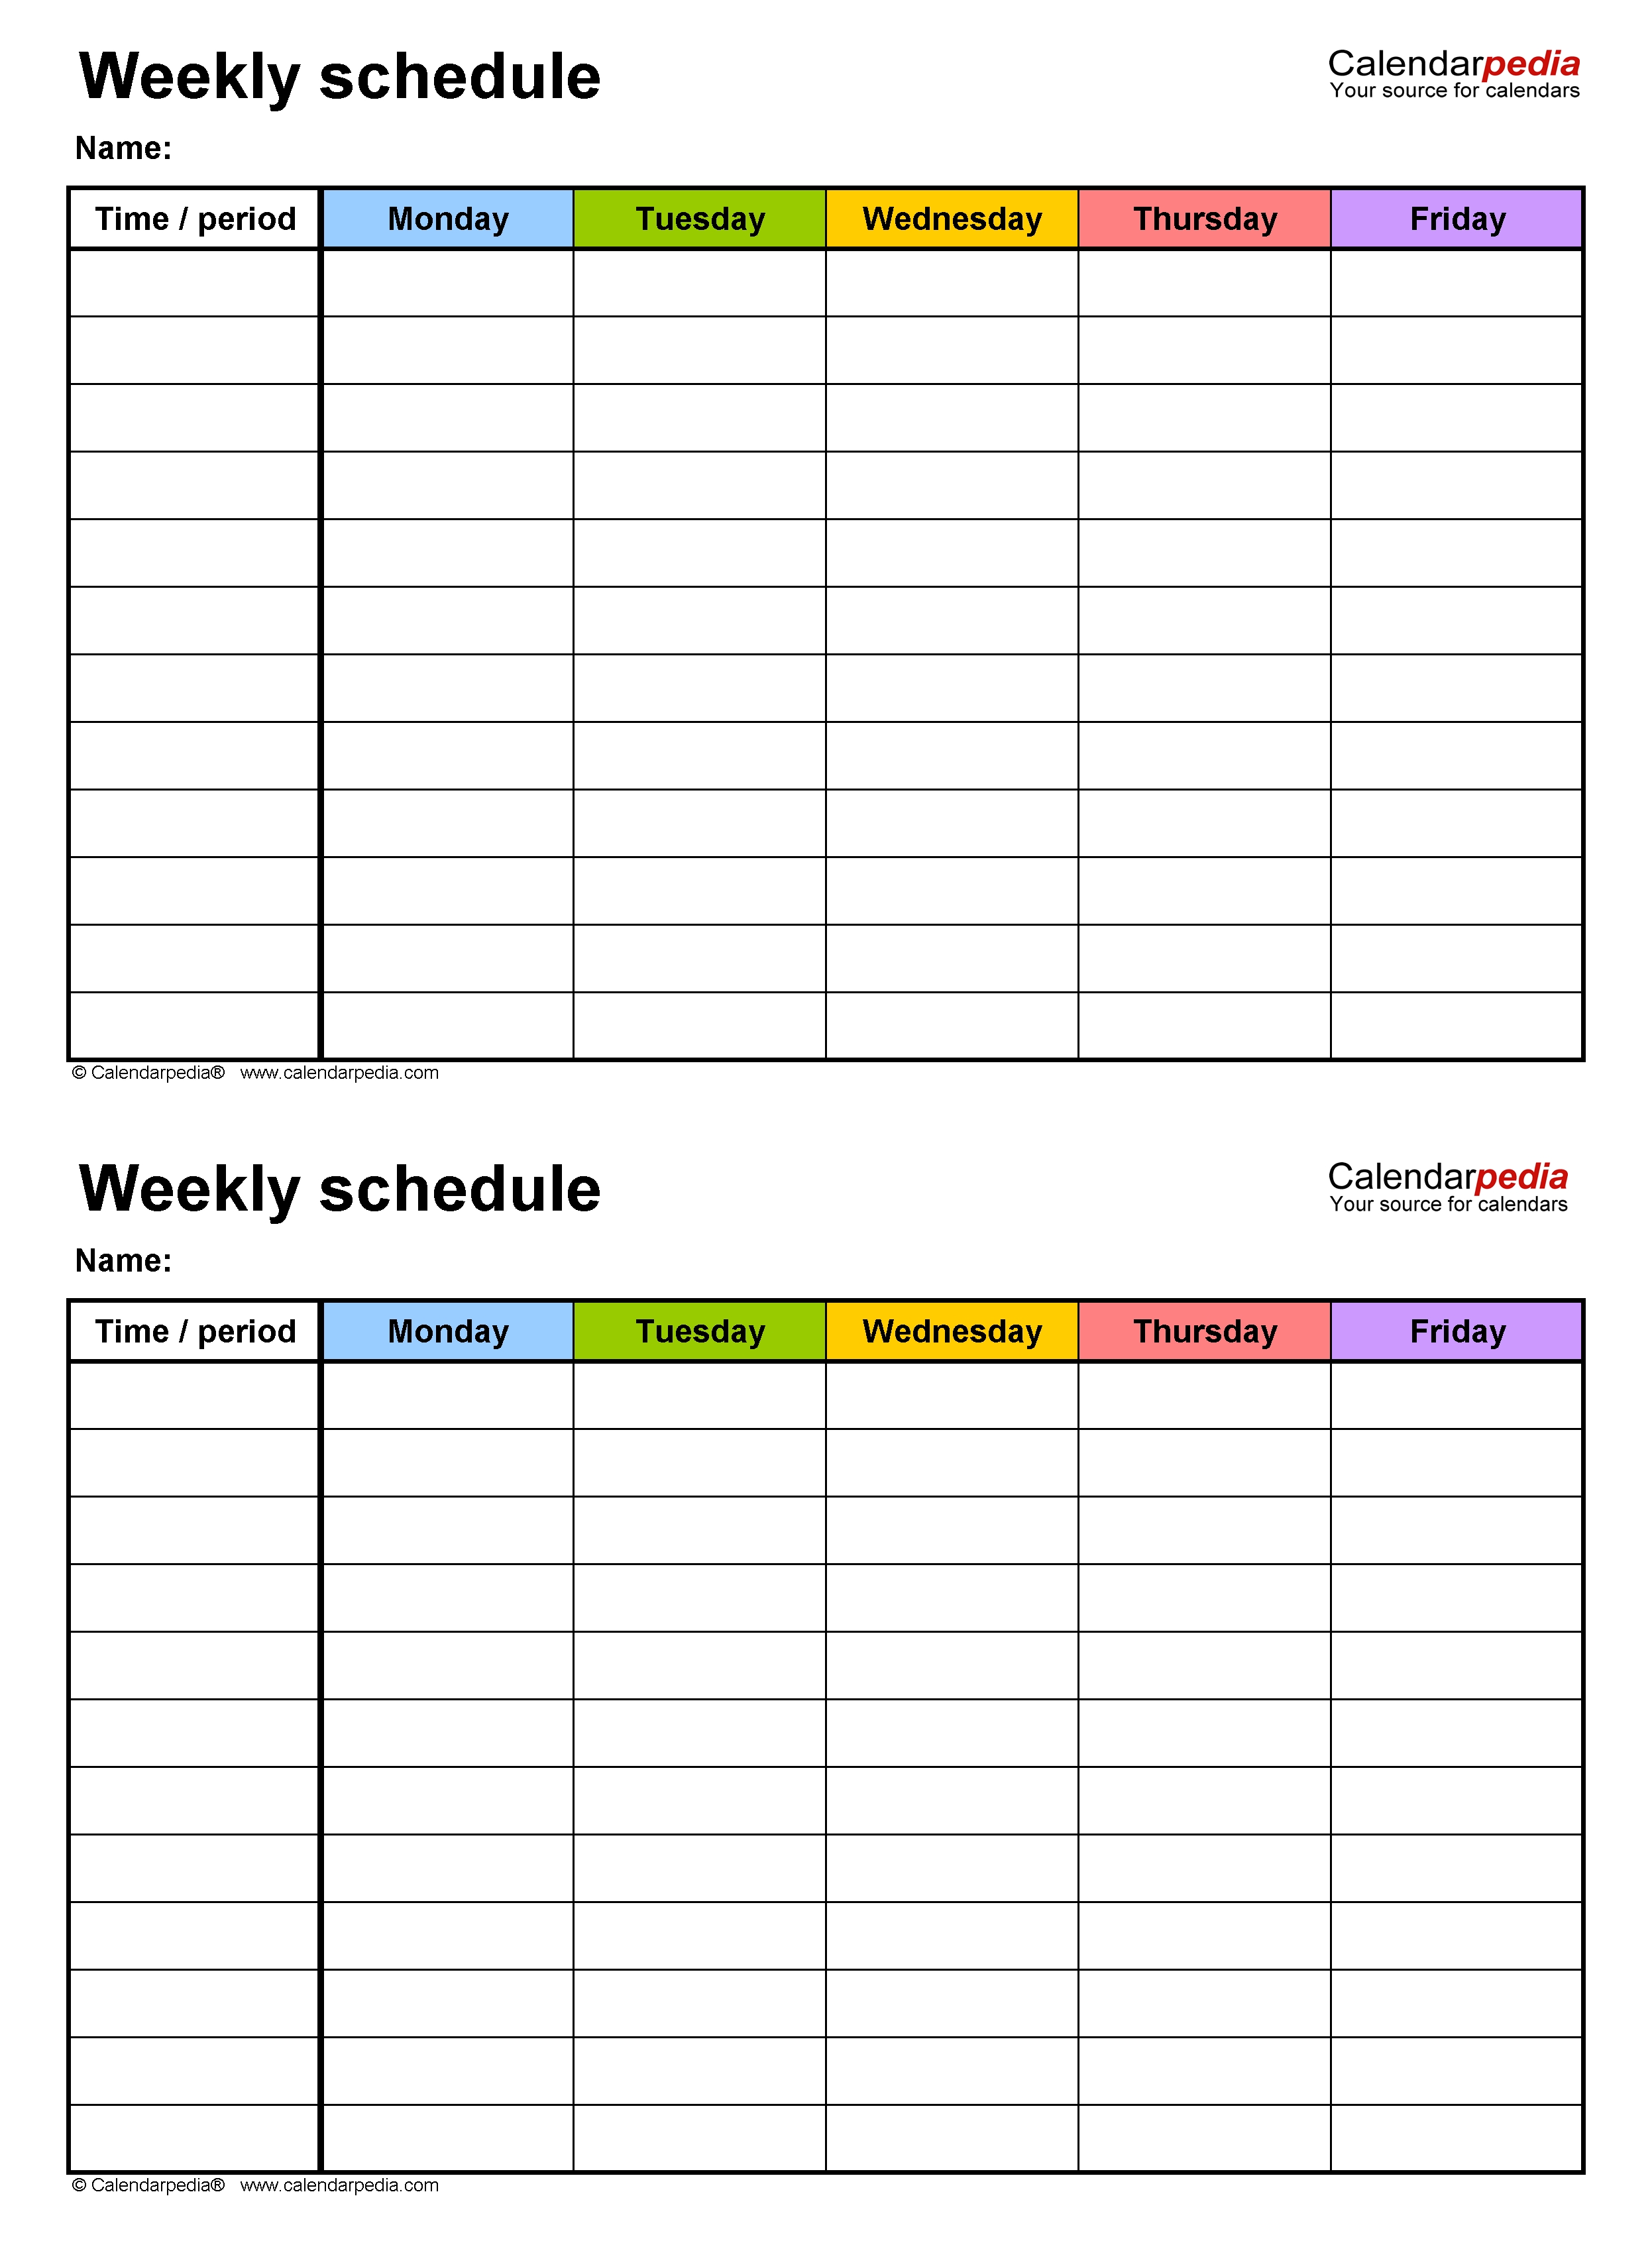 Free Weekly Schedule Templates For Word - 18 Templates-Seven Day Calendar Schedule Template